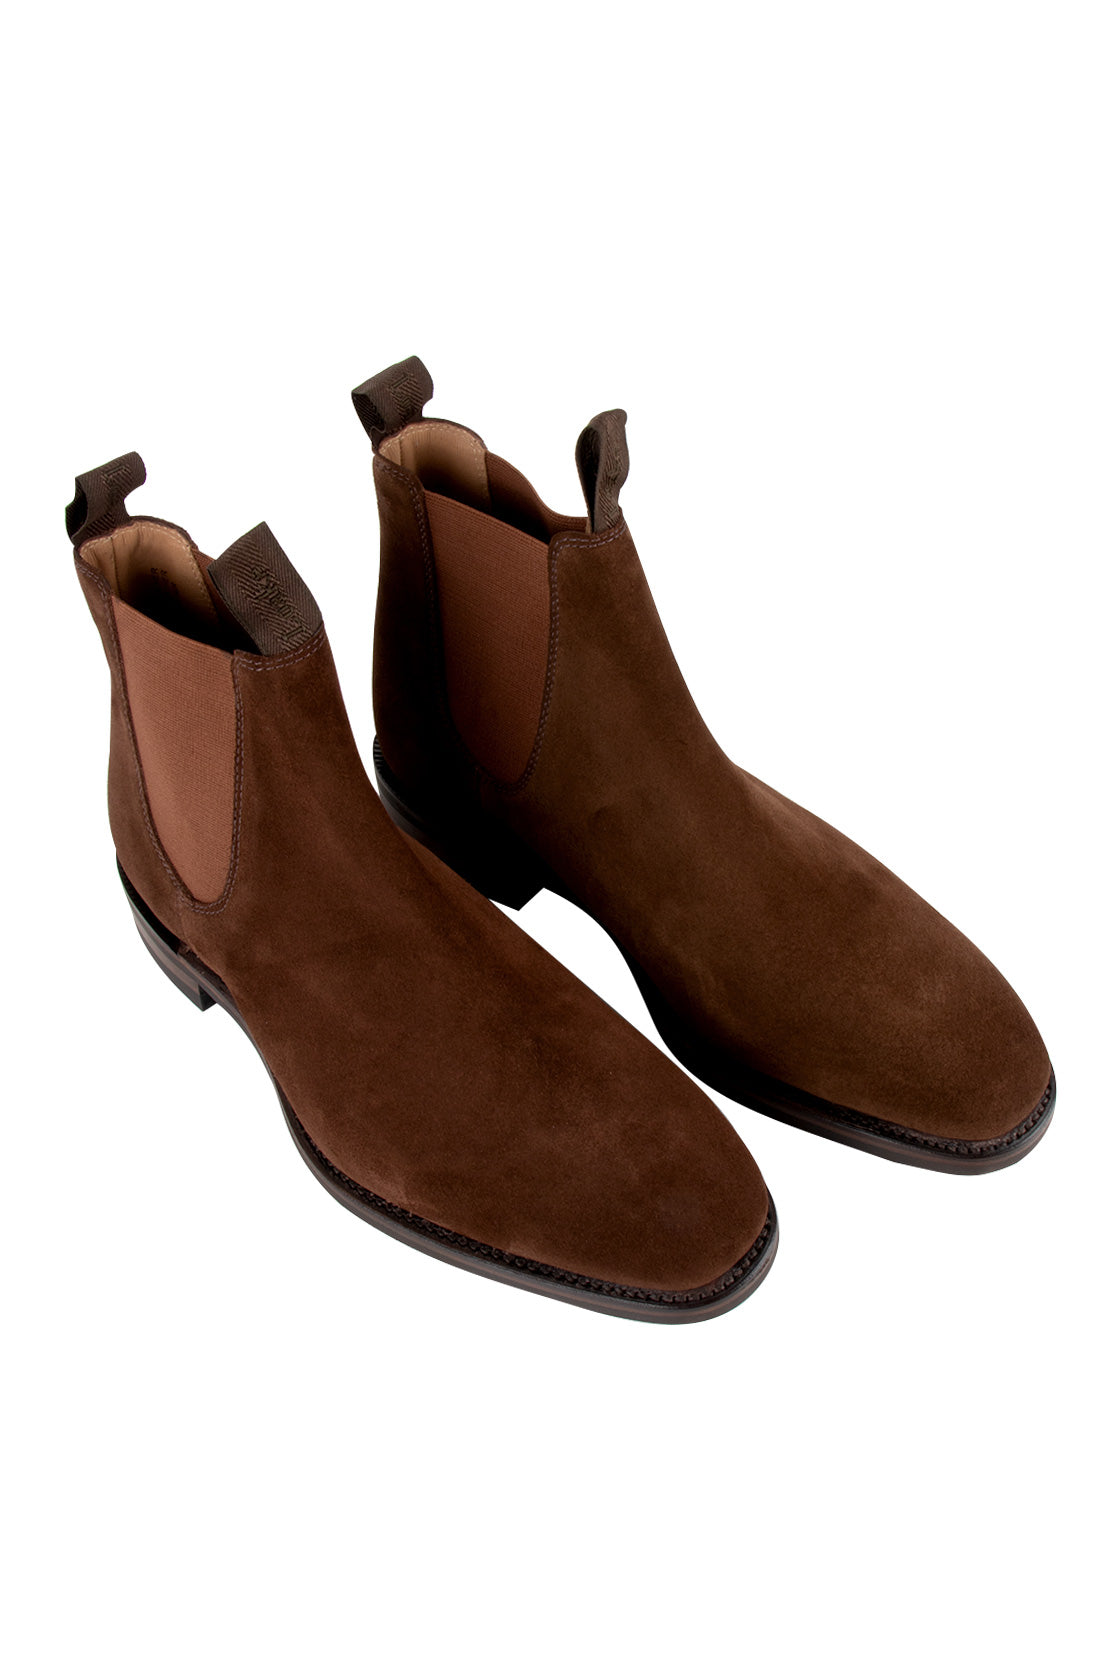 Loake Chatsworth Suede Boot Tobacco